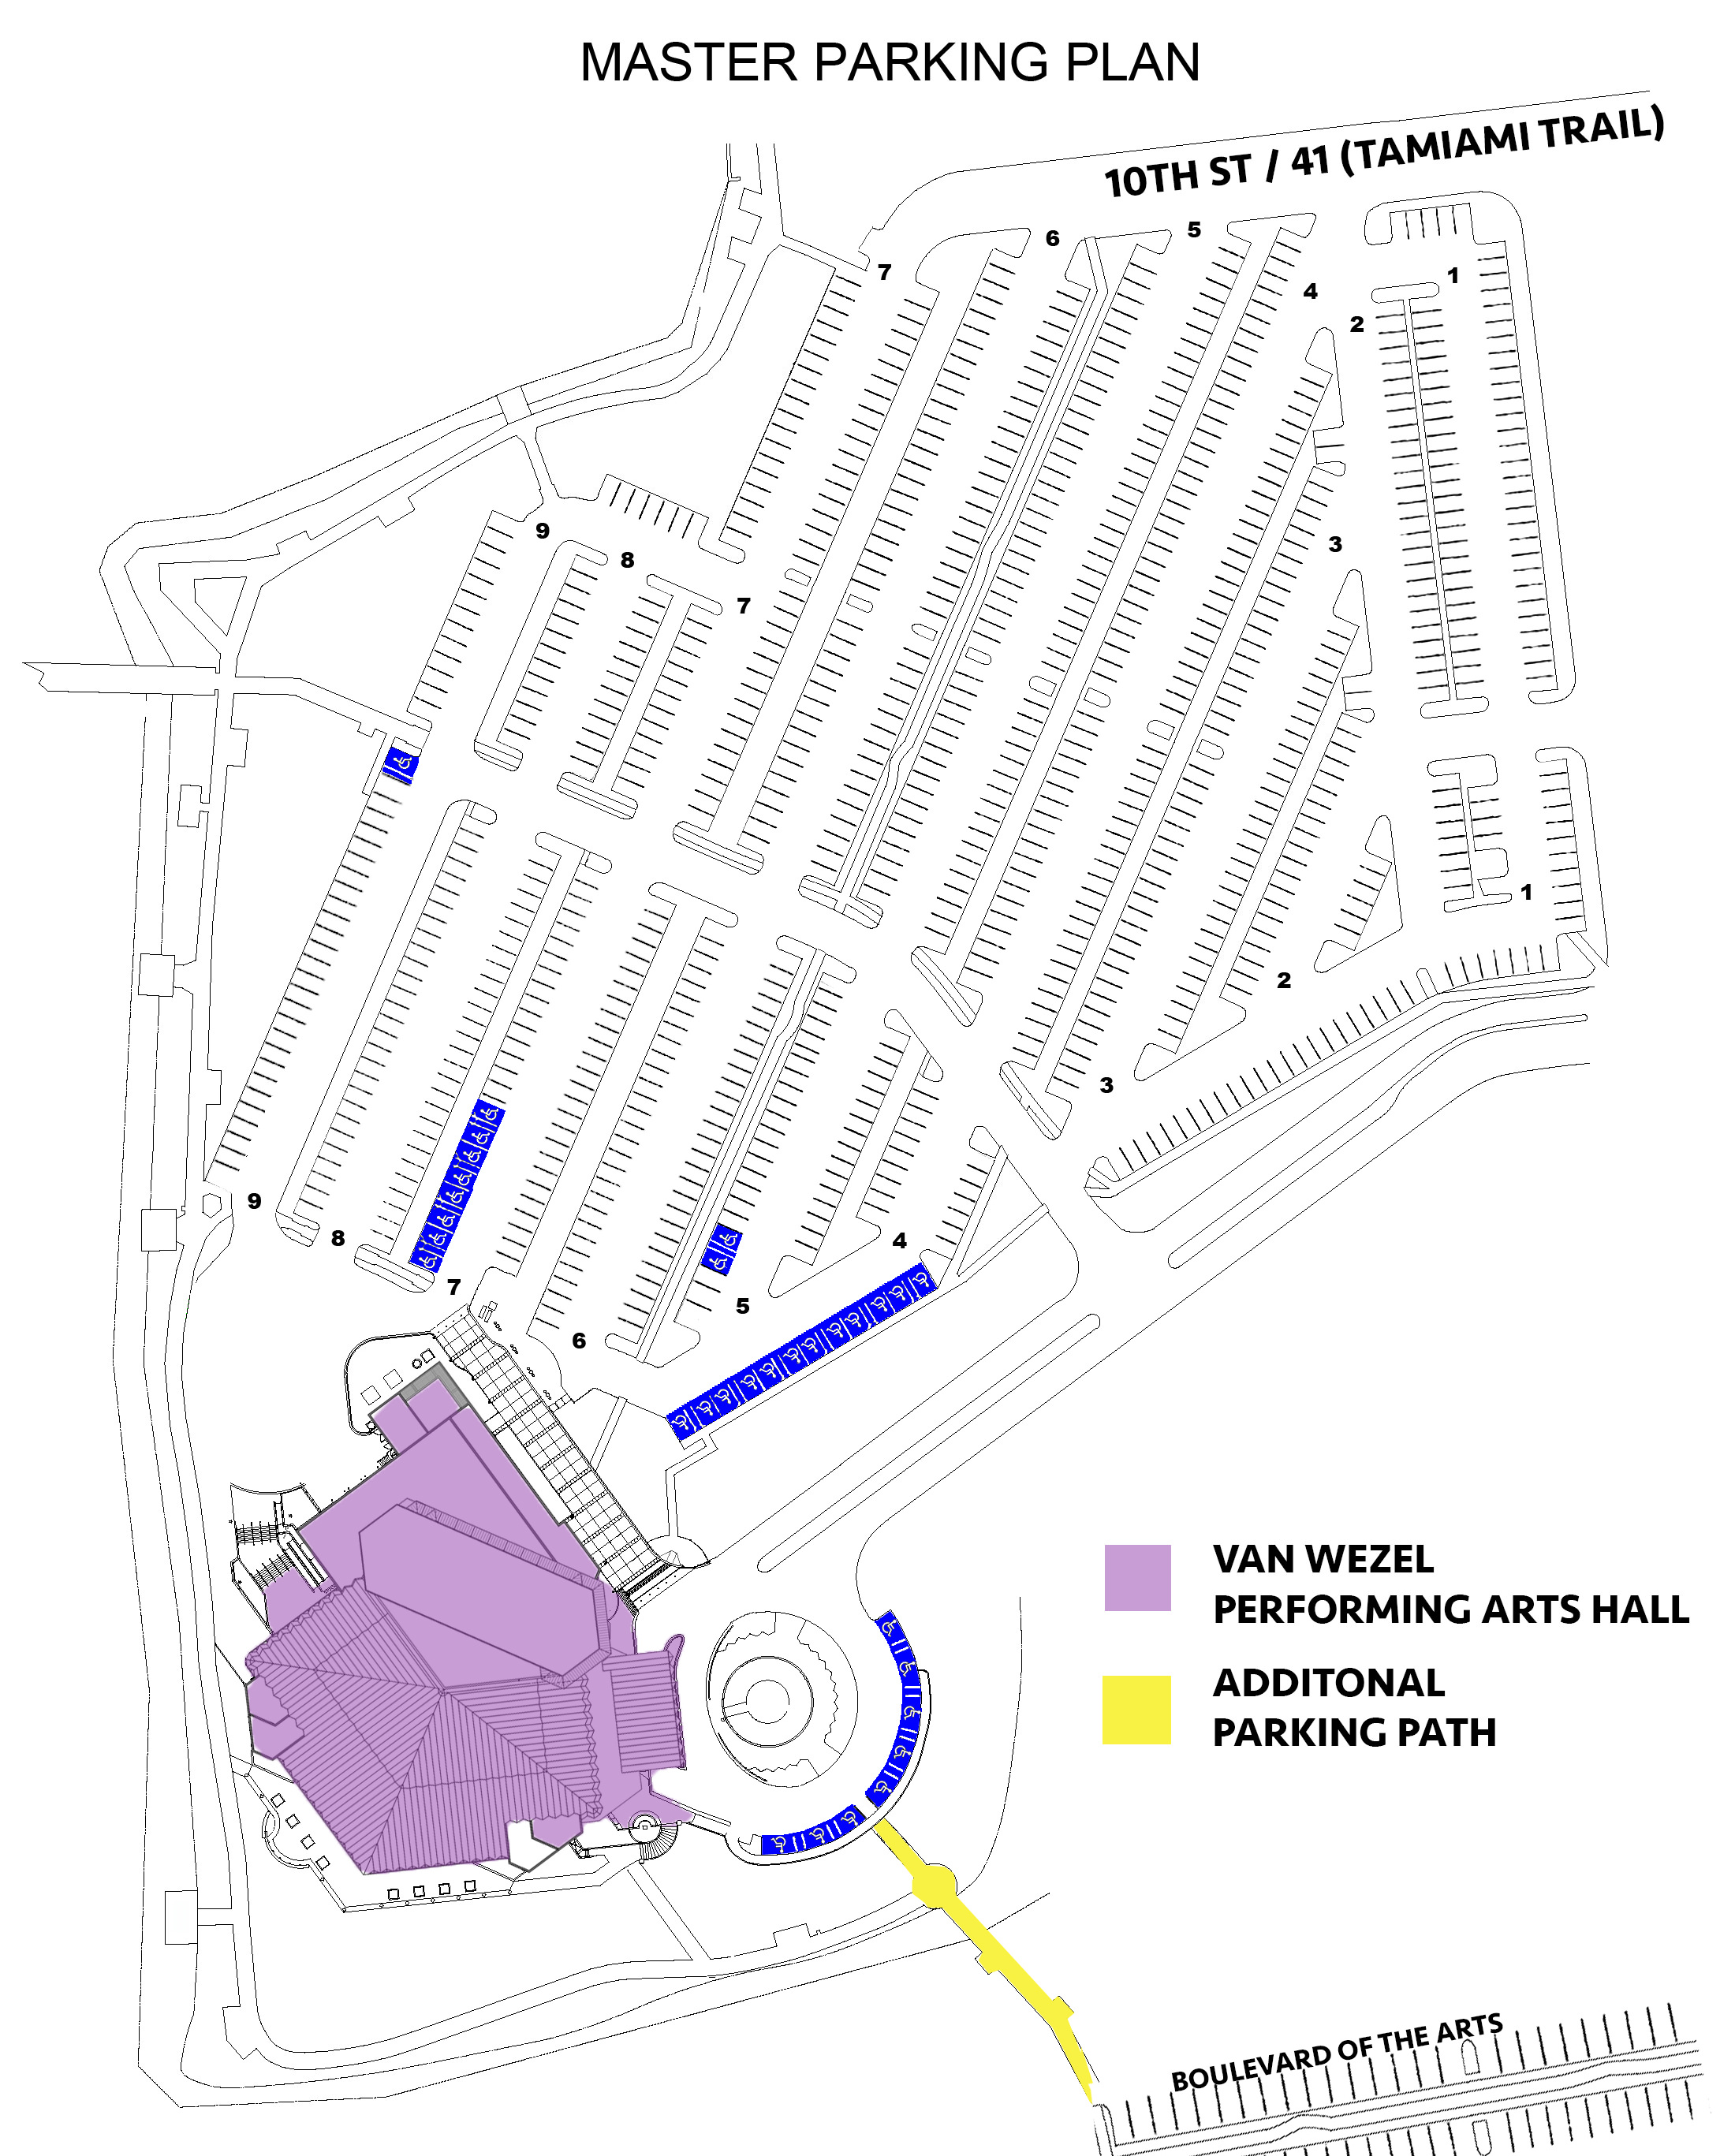 The parking lot accommodates 850 vehicles and is accessible from 10th Street and 6th Street (Boulevard of the Arts) from US 41 (North Tamiami Trail).